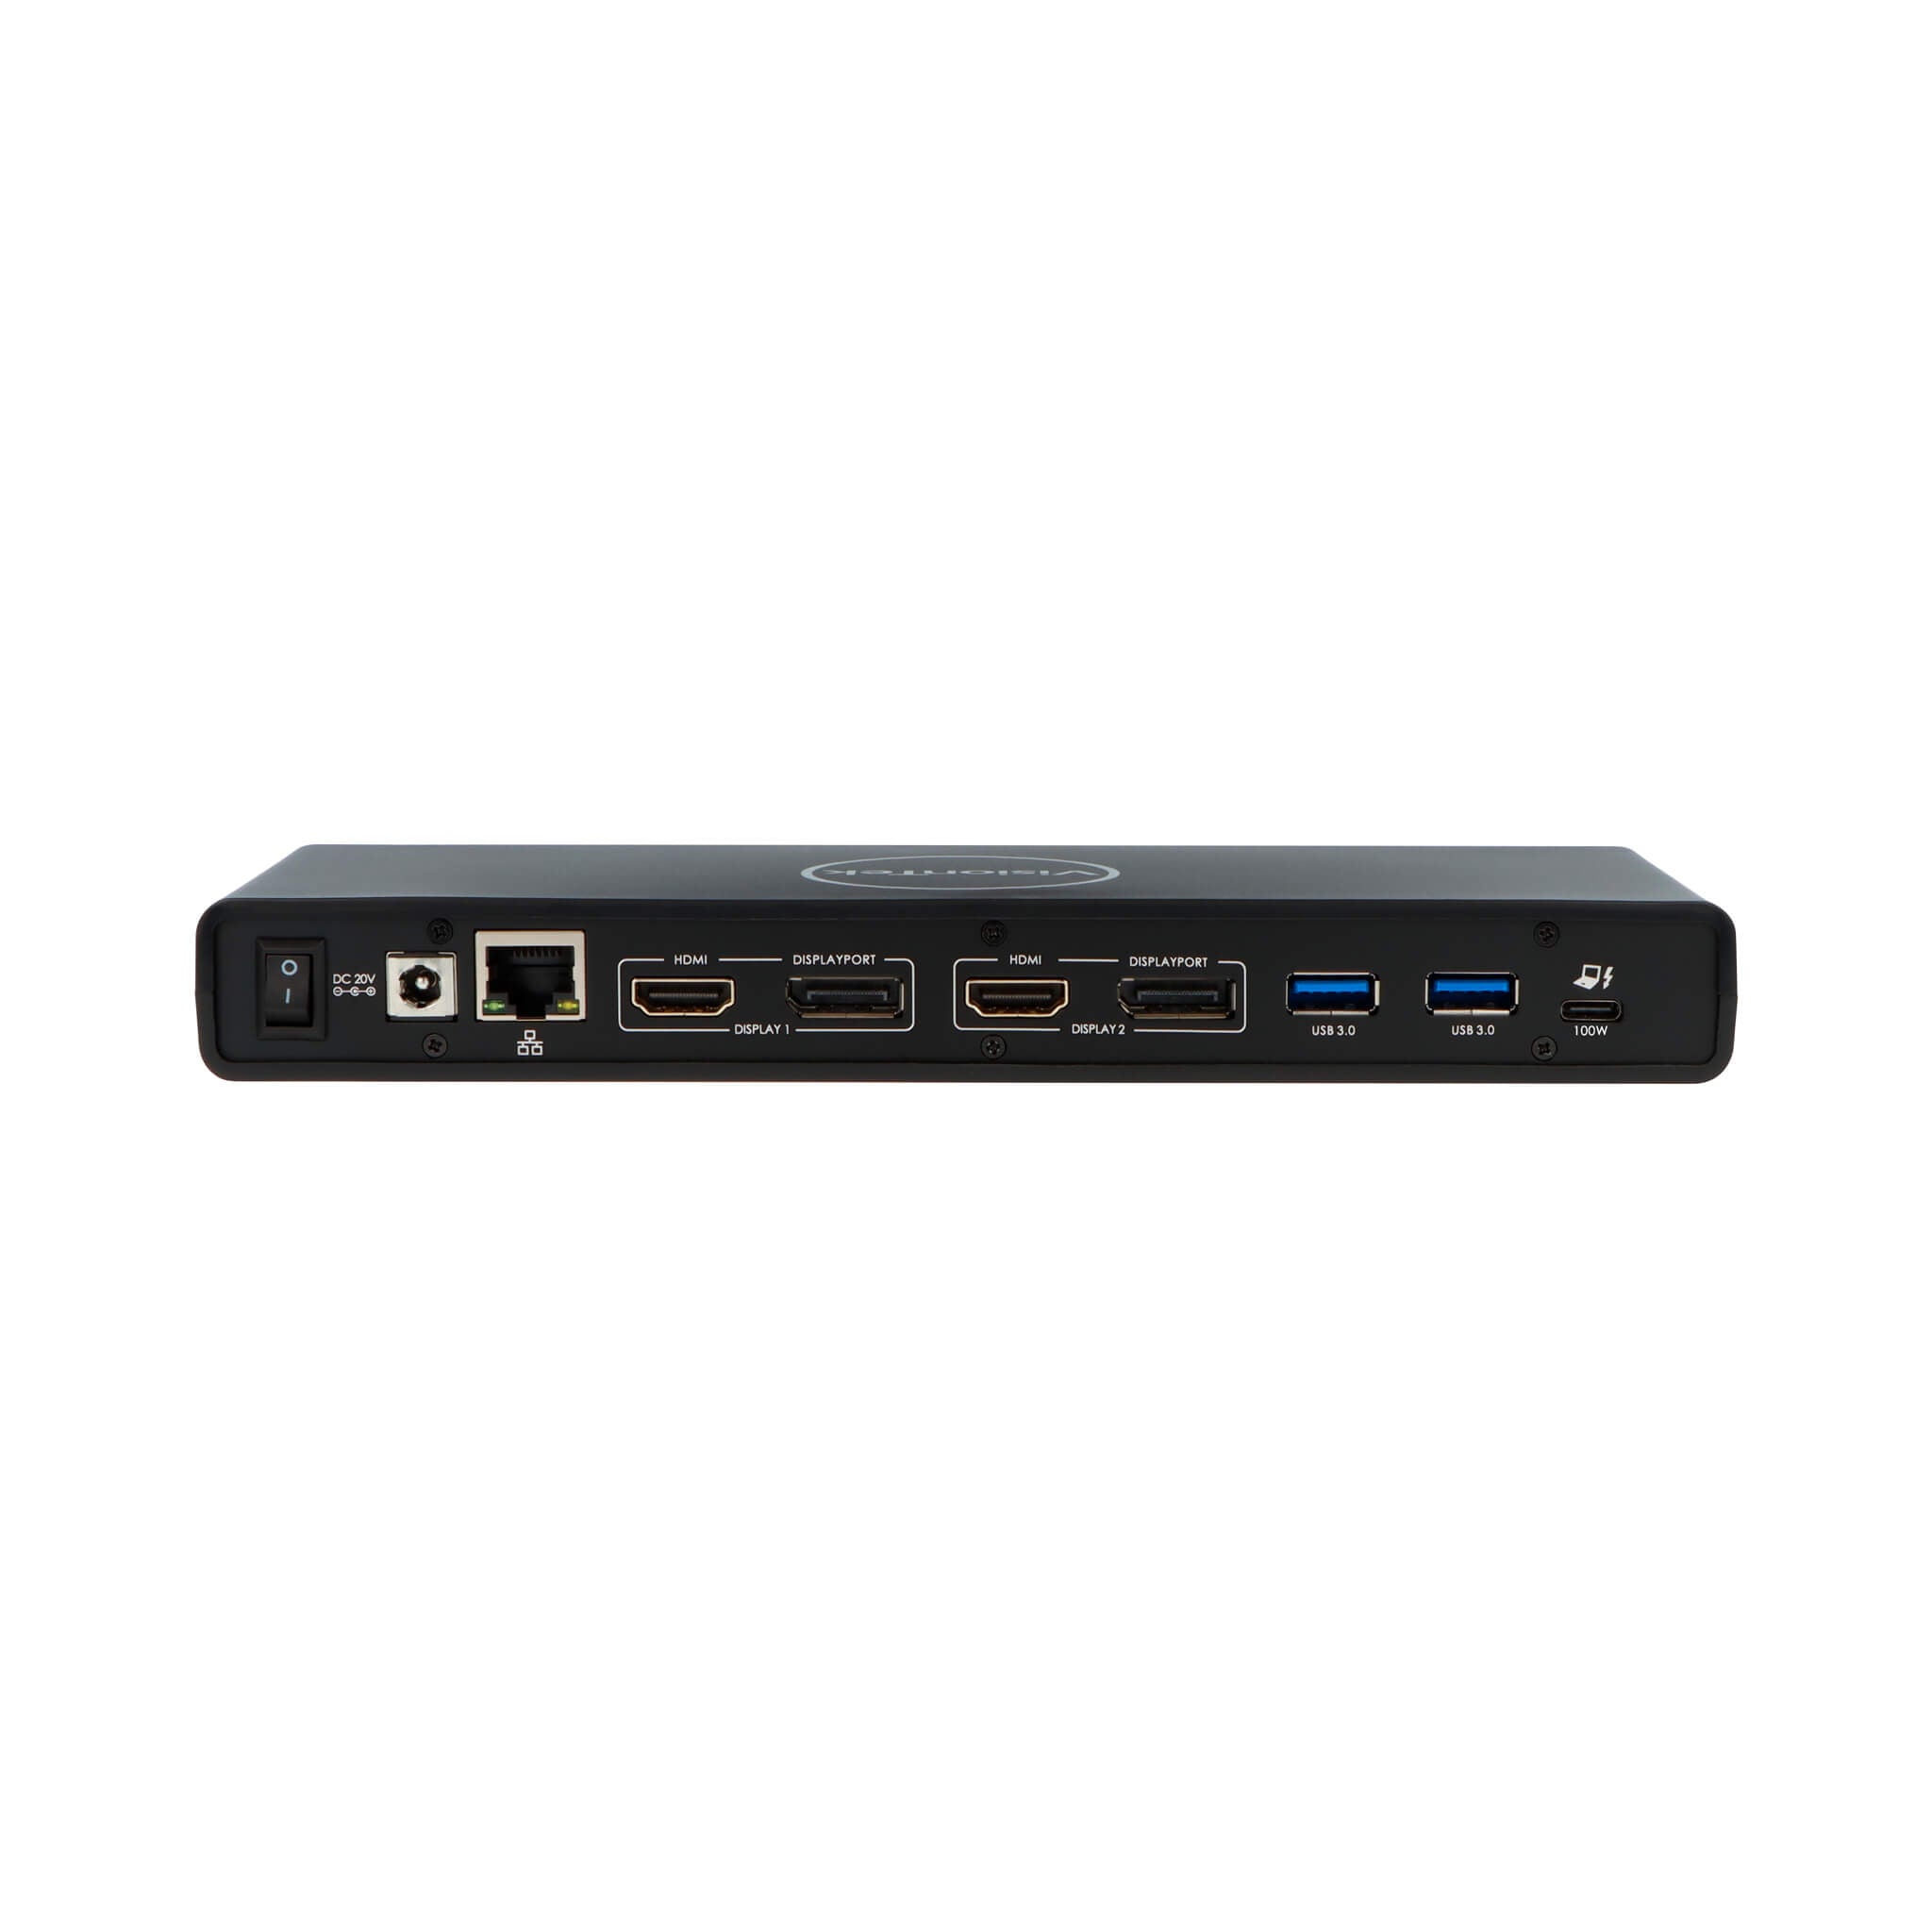 VT4510 Dual Display 4K USB 3.0 / USB-C Docking Station with 100W Power Delivery